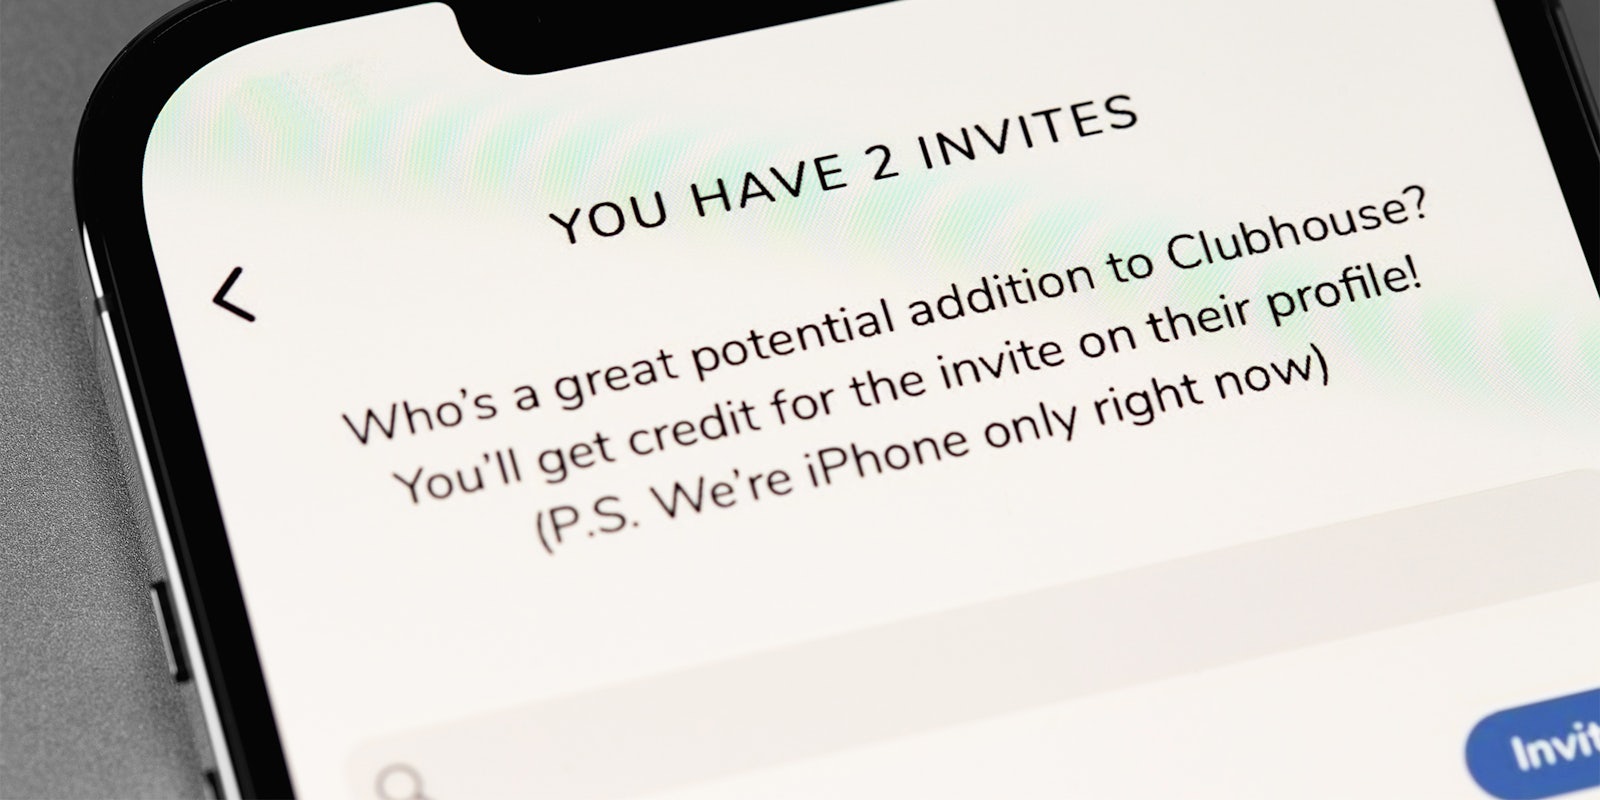 iPhone with 'You have 2 invites. Who's a great potential addition to Clubhouse? You'll get credit for the invite on their profile! (P.S. We're iPhone only right now)' message